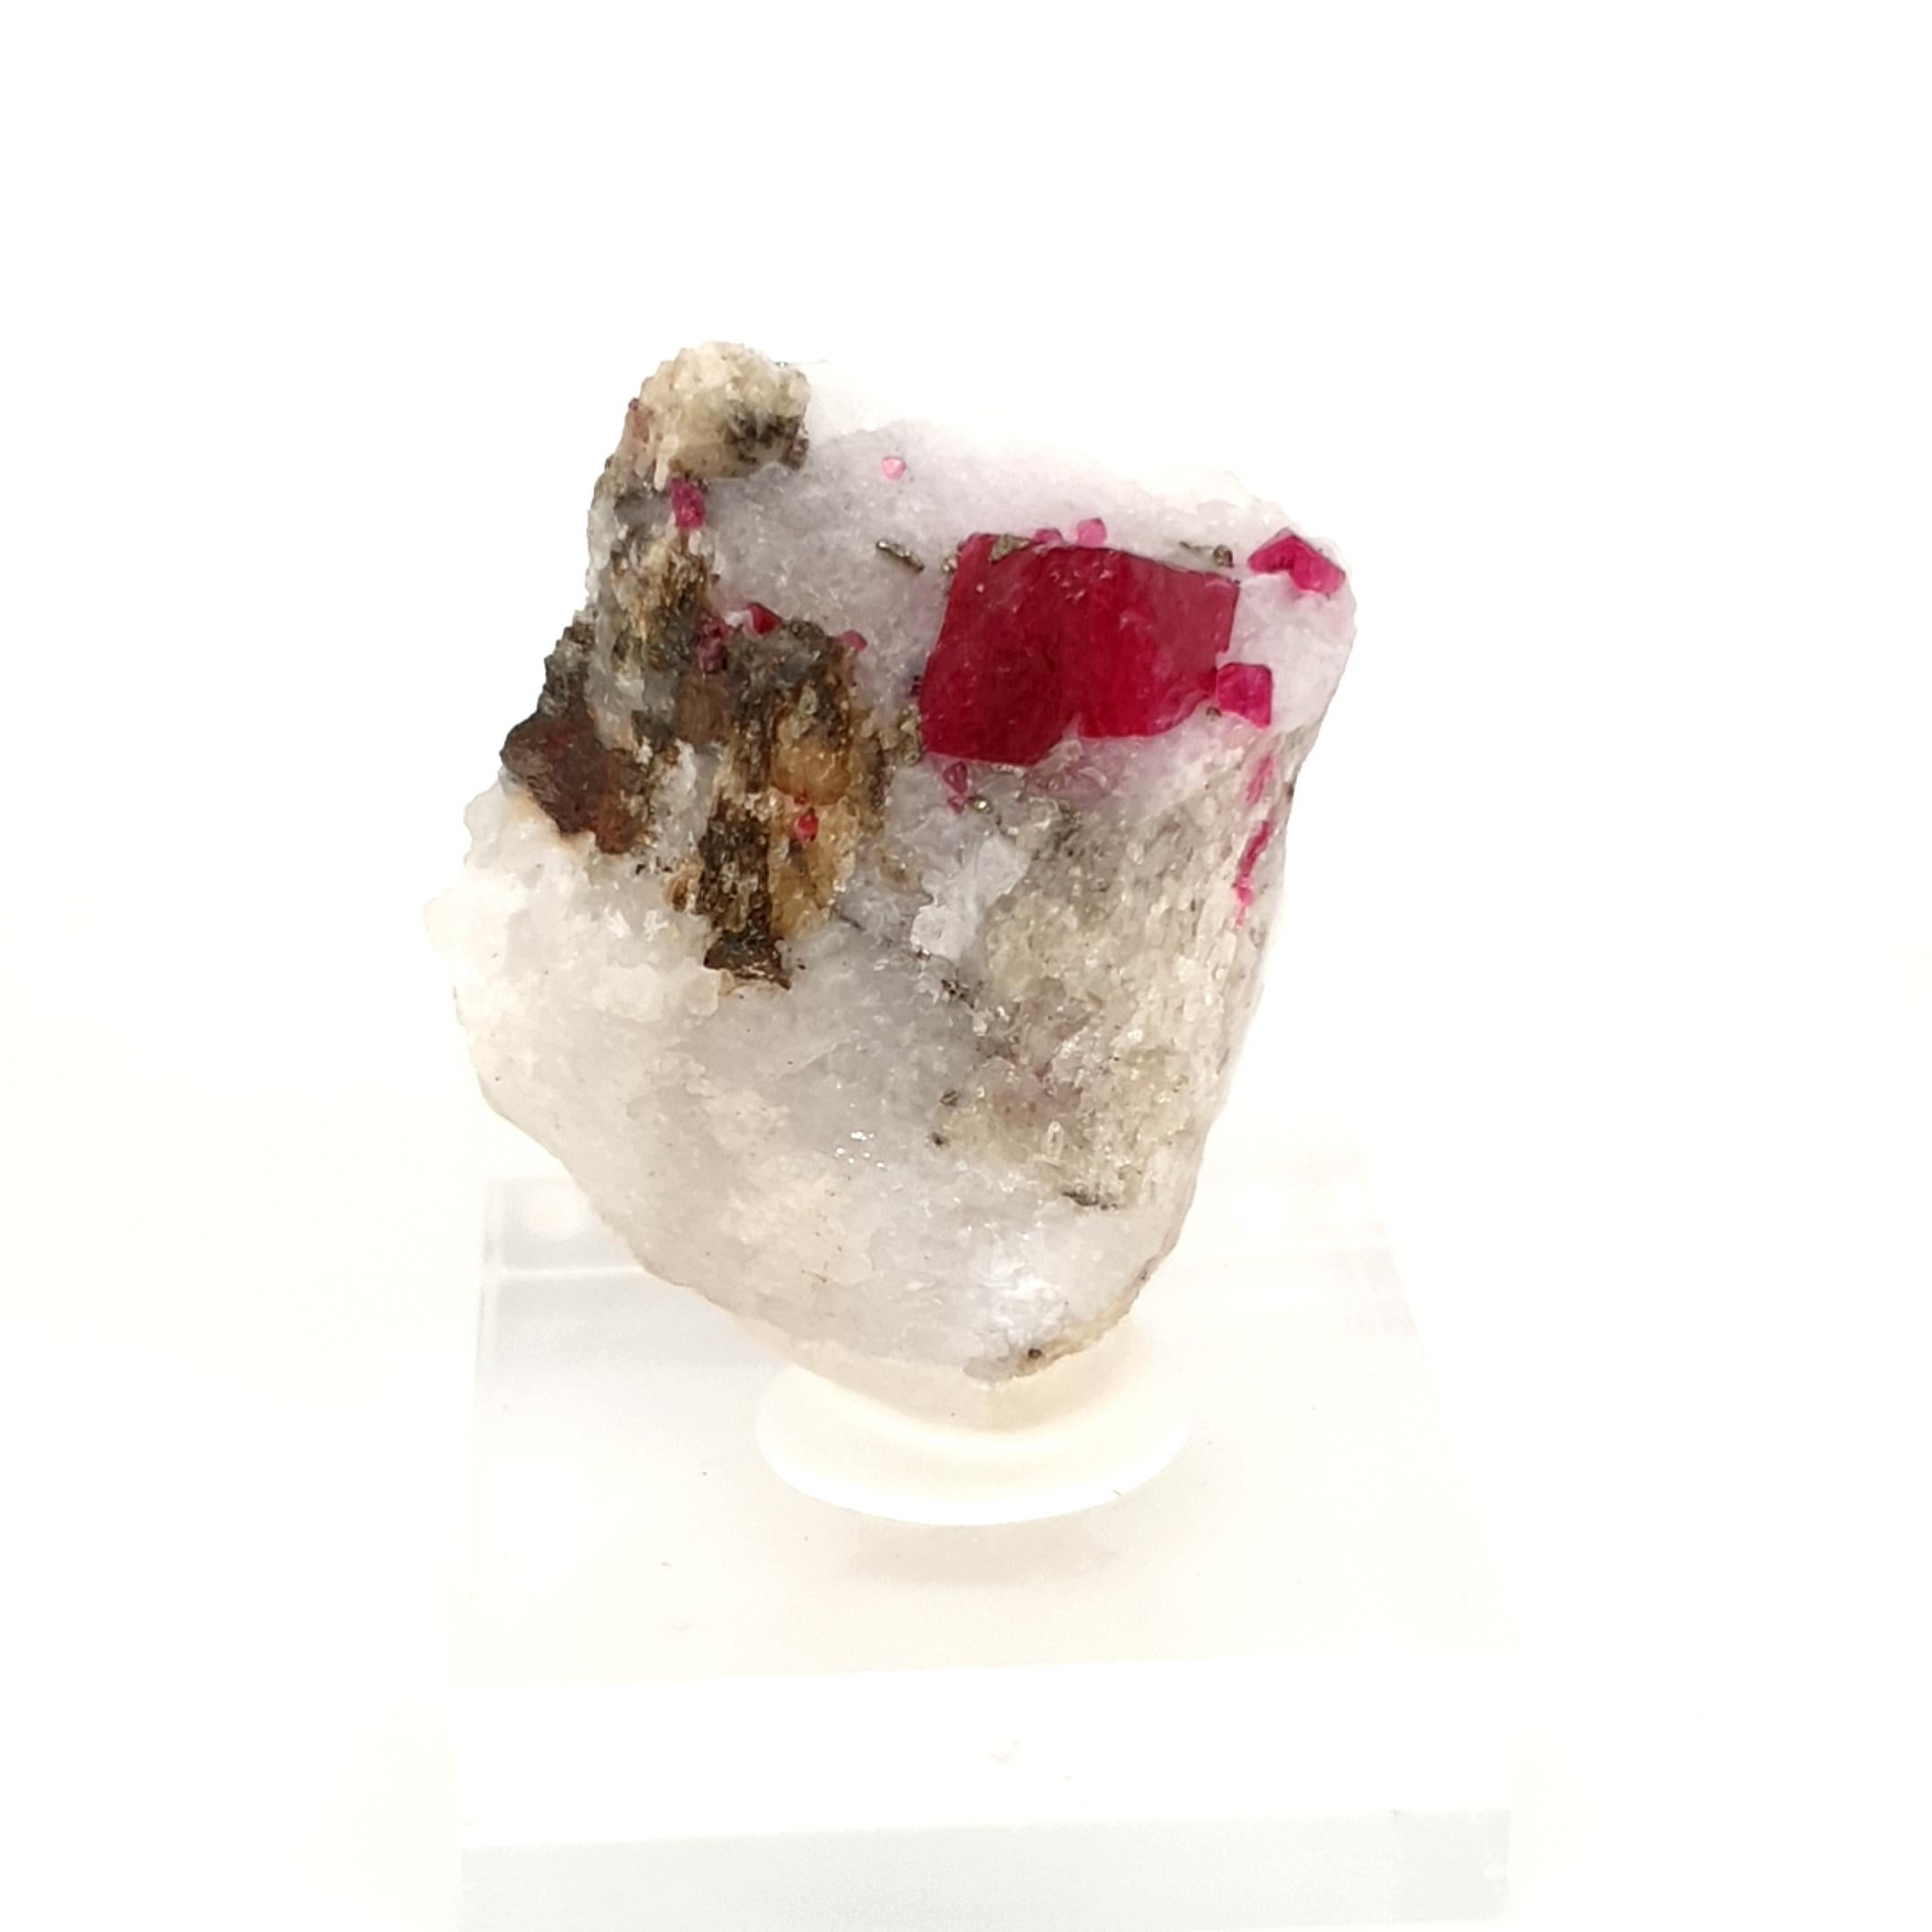 These Specimen exhibits an incredible rich saturated red hue in the form of small octaeder embedded in a matrix of grayish white Calcite.
The contrast with the cluster of well-formed vivid red spinel octahedra is striking.

measures: 28x18x34